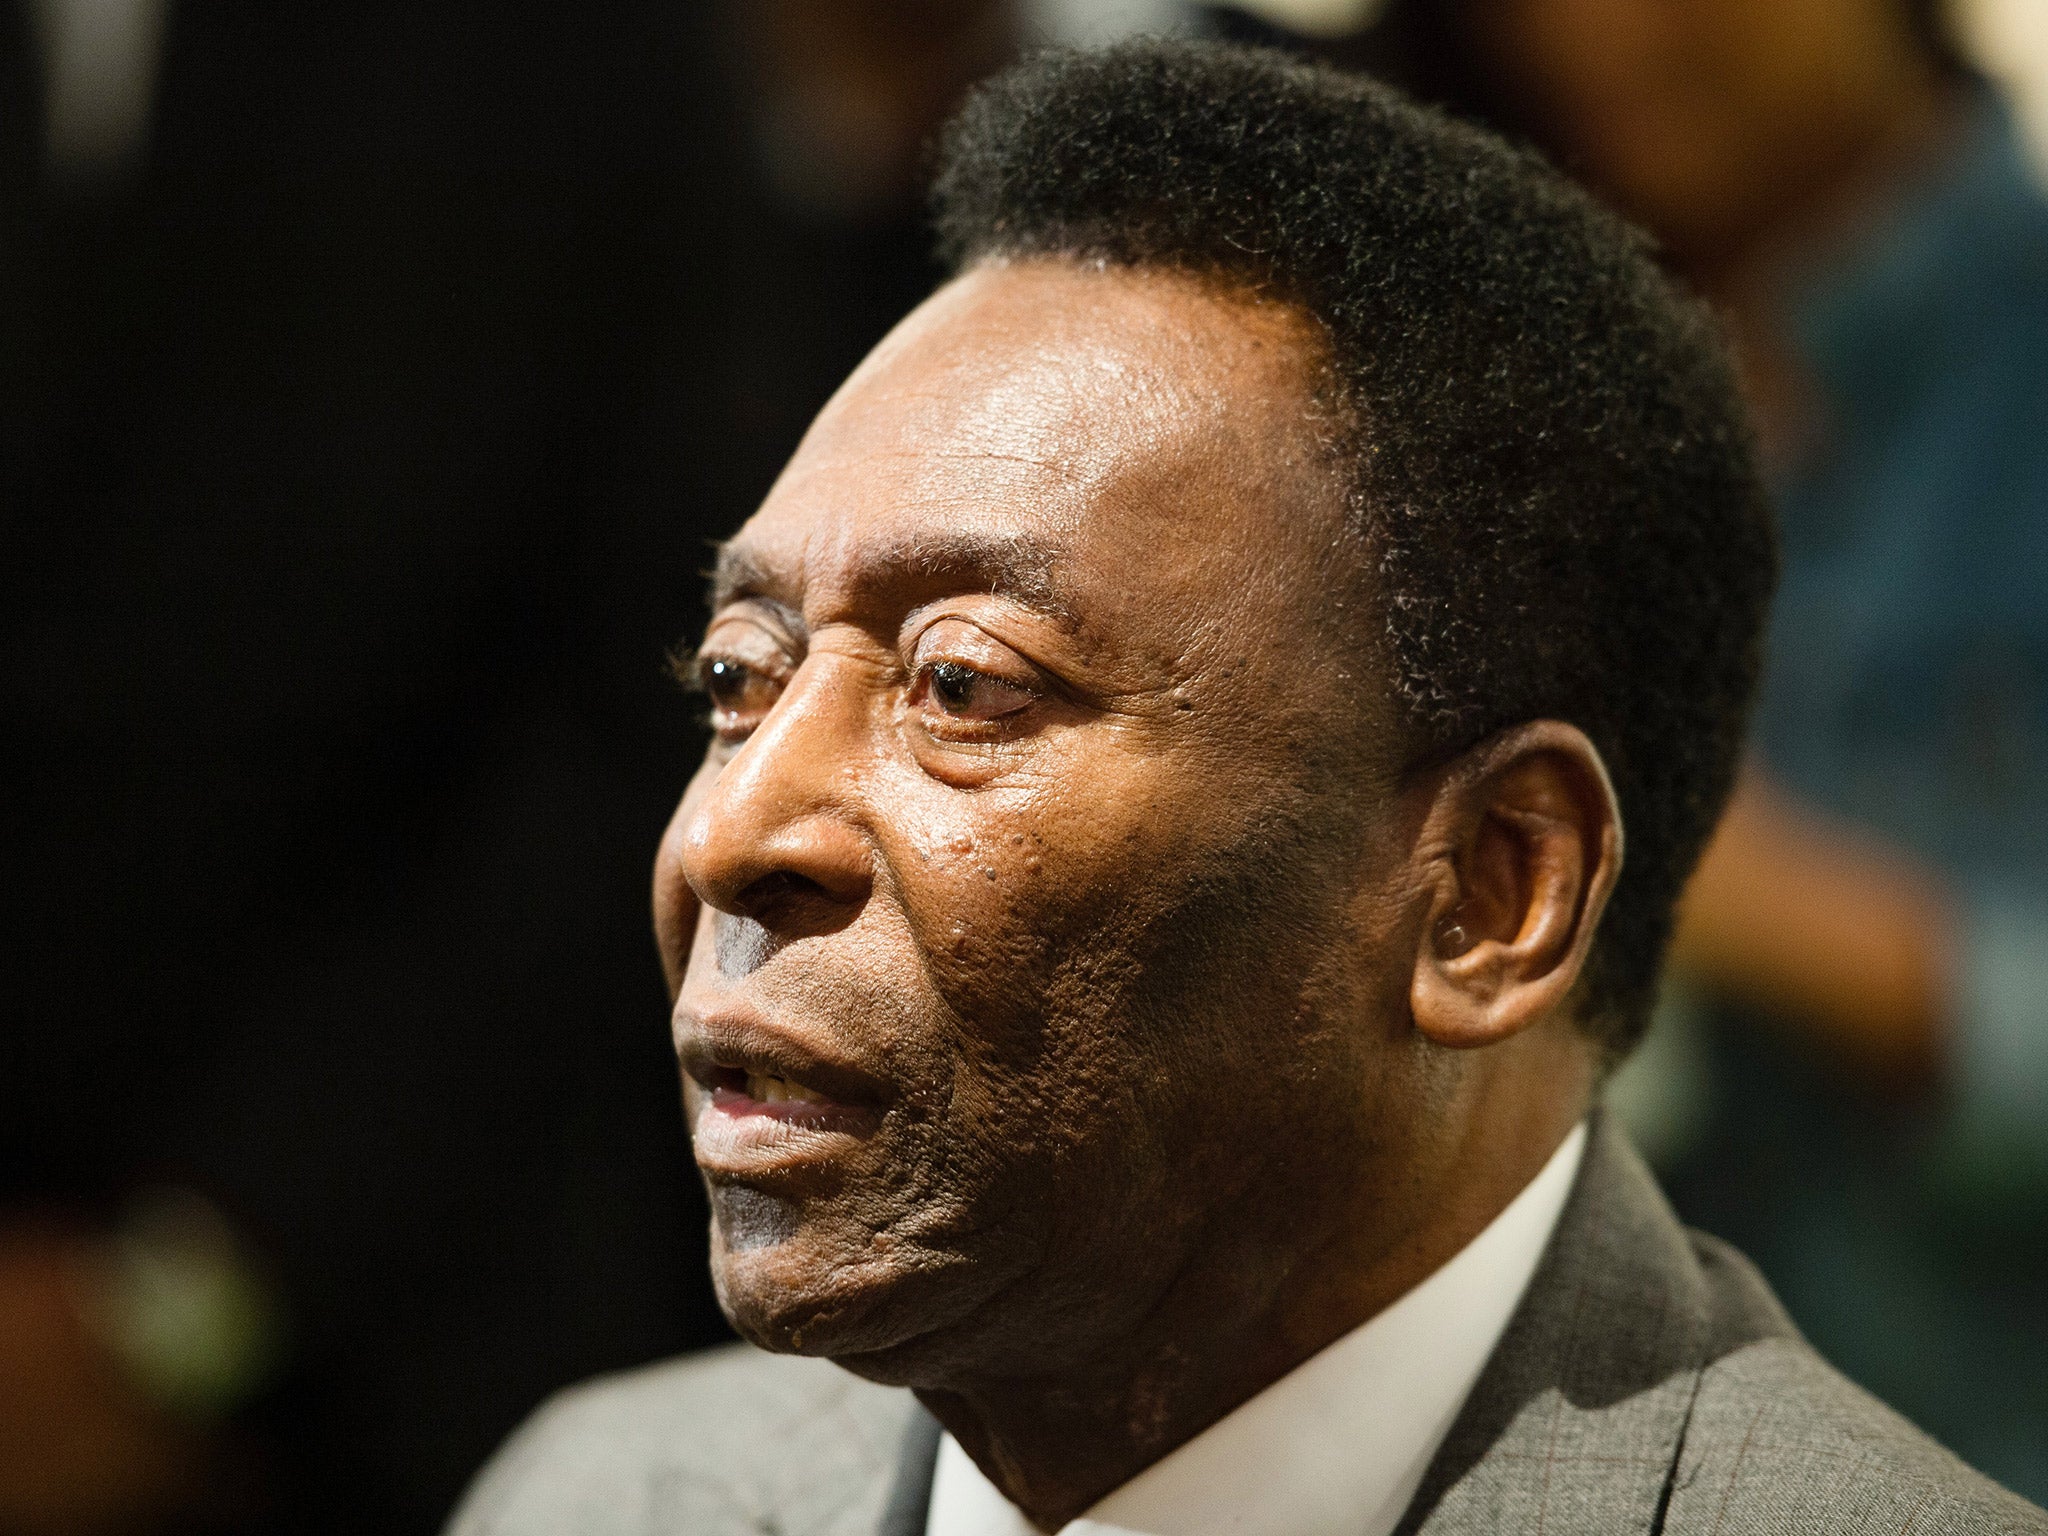 Pele has been forced to withdraw from the Olympic opening ceremony due to poor health